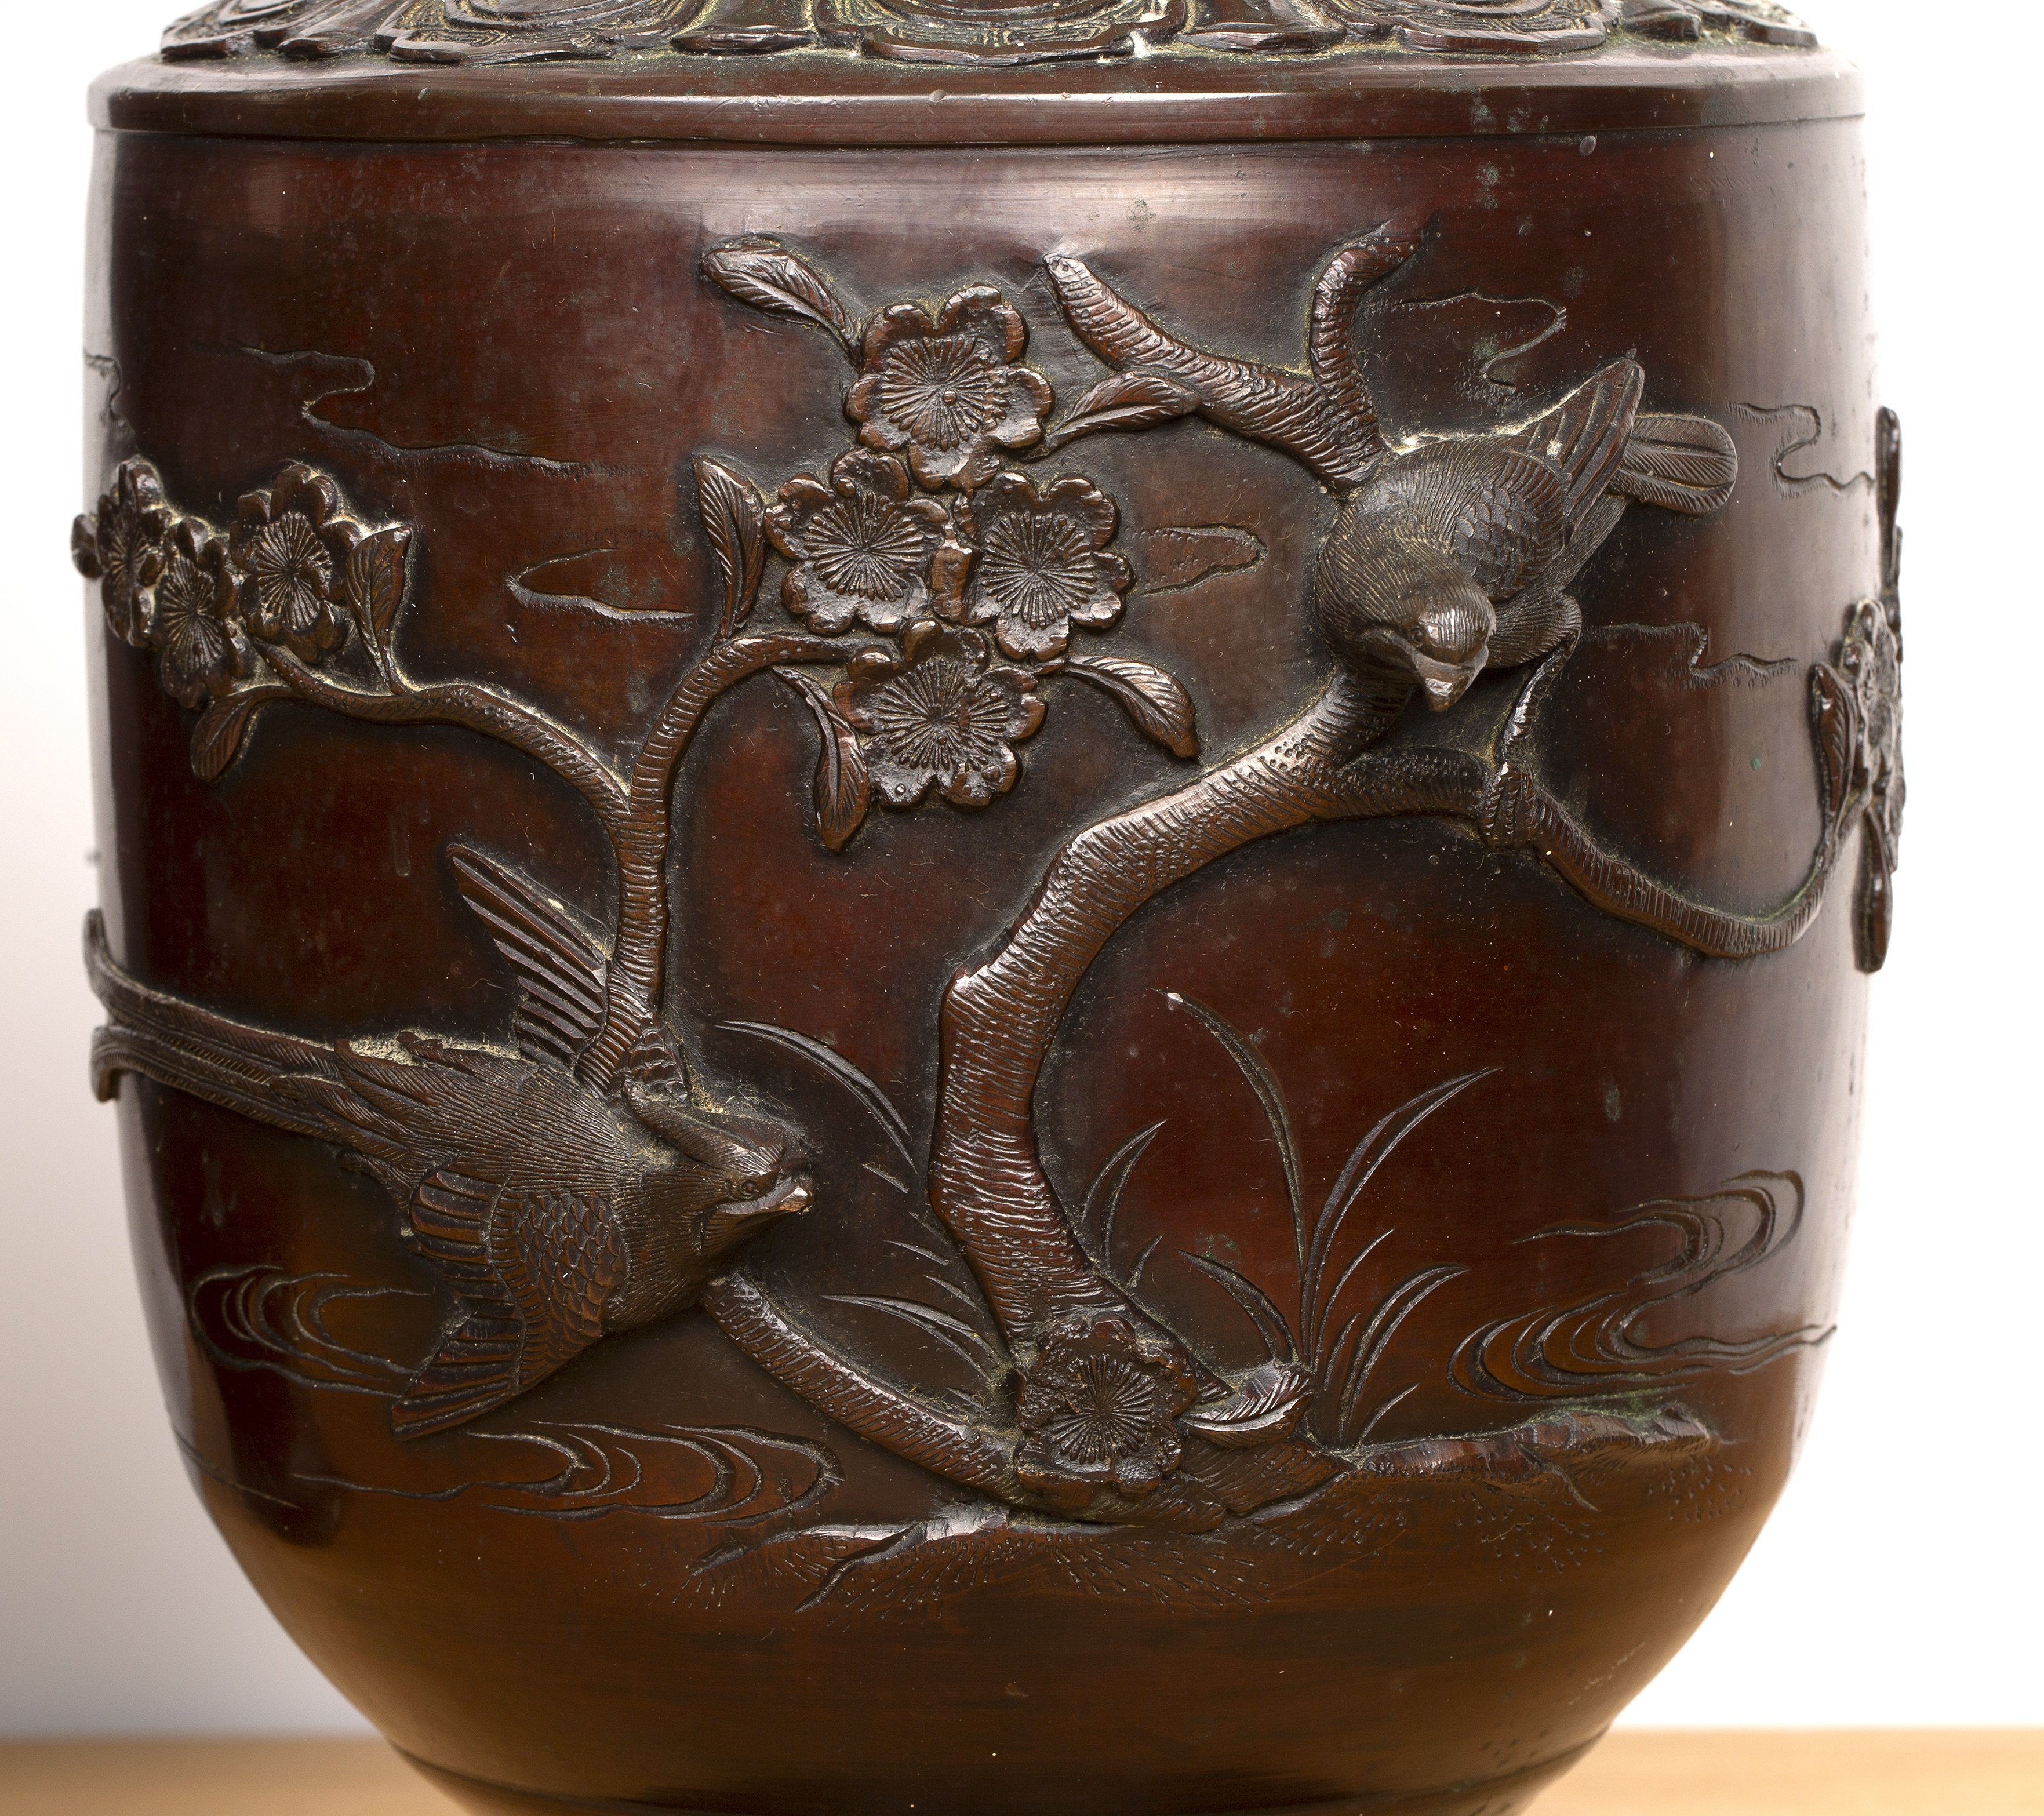 Pair of bronze vases Japanese, late 19th Century decorated with birds and mons motifs, with an - Image 4 of 7